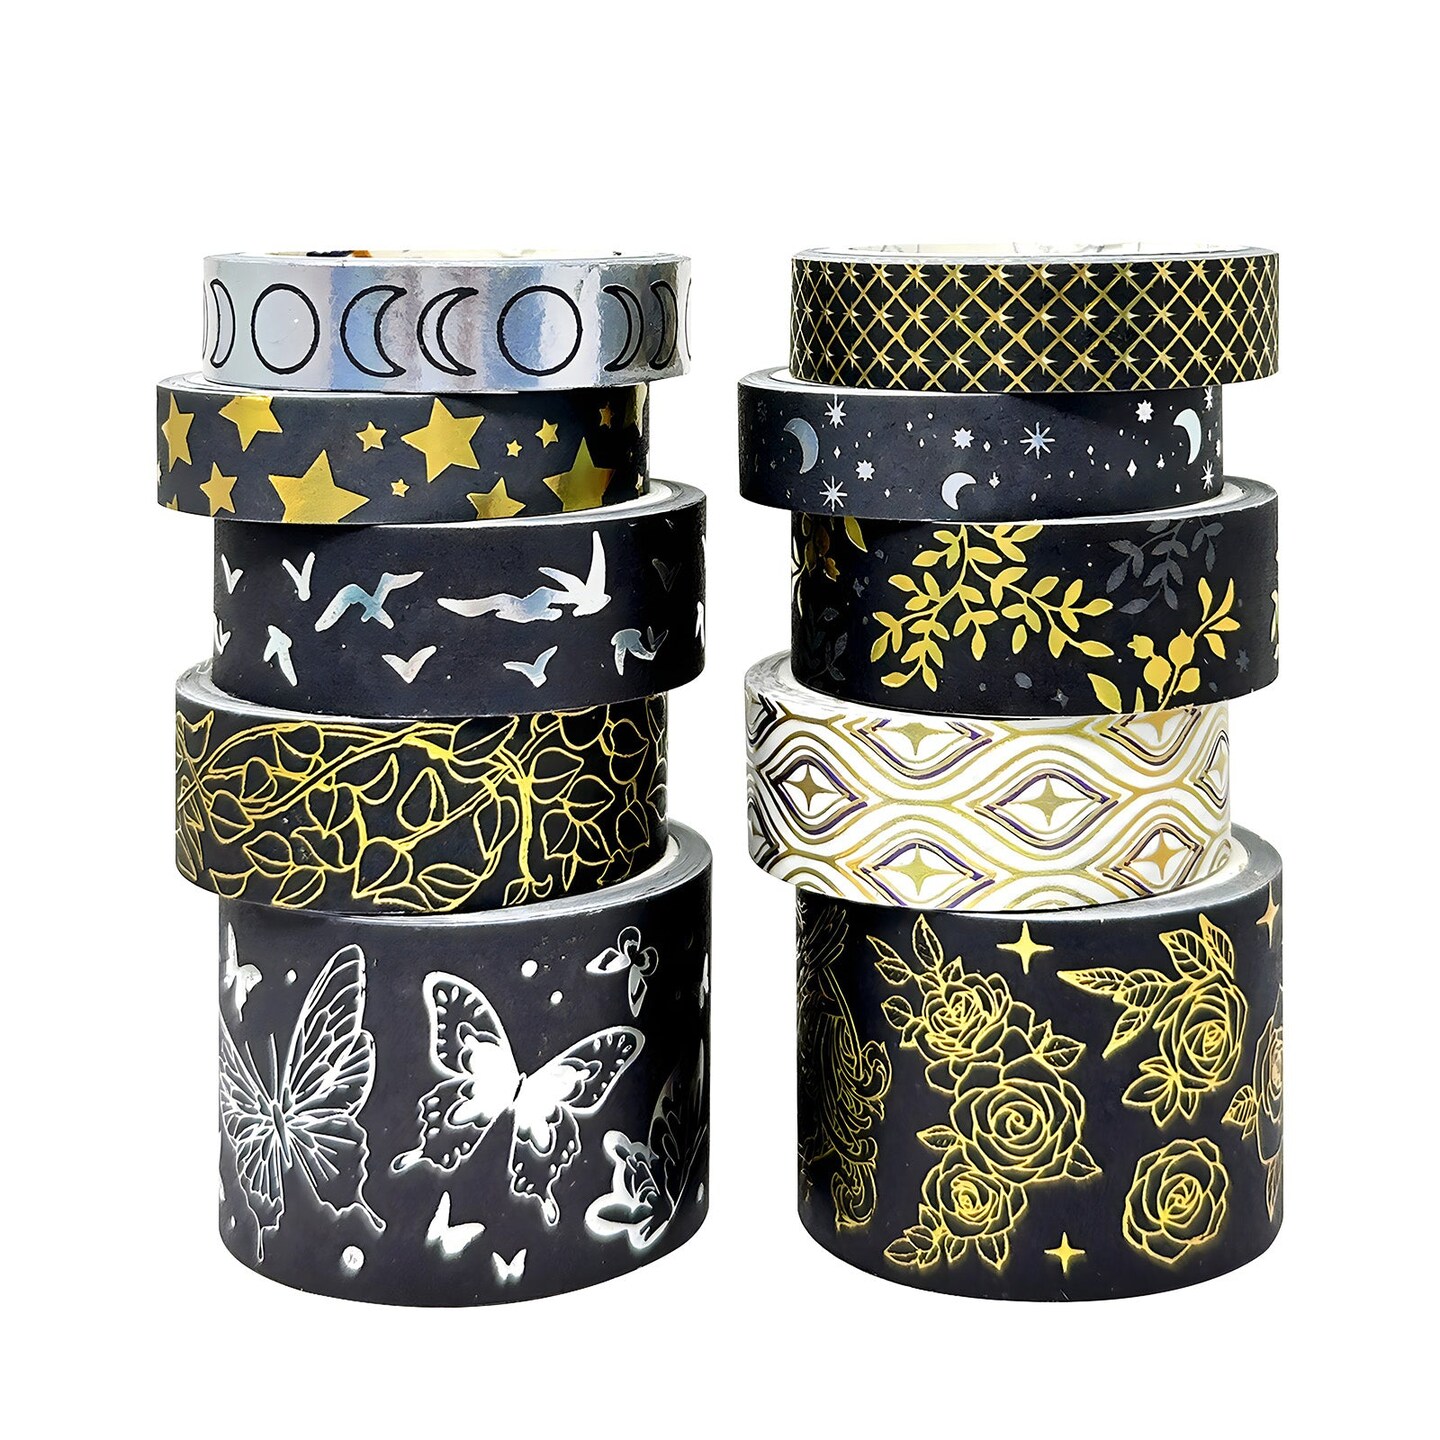 Silver & Black Glitter Tape by Recollections™